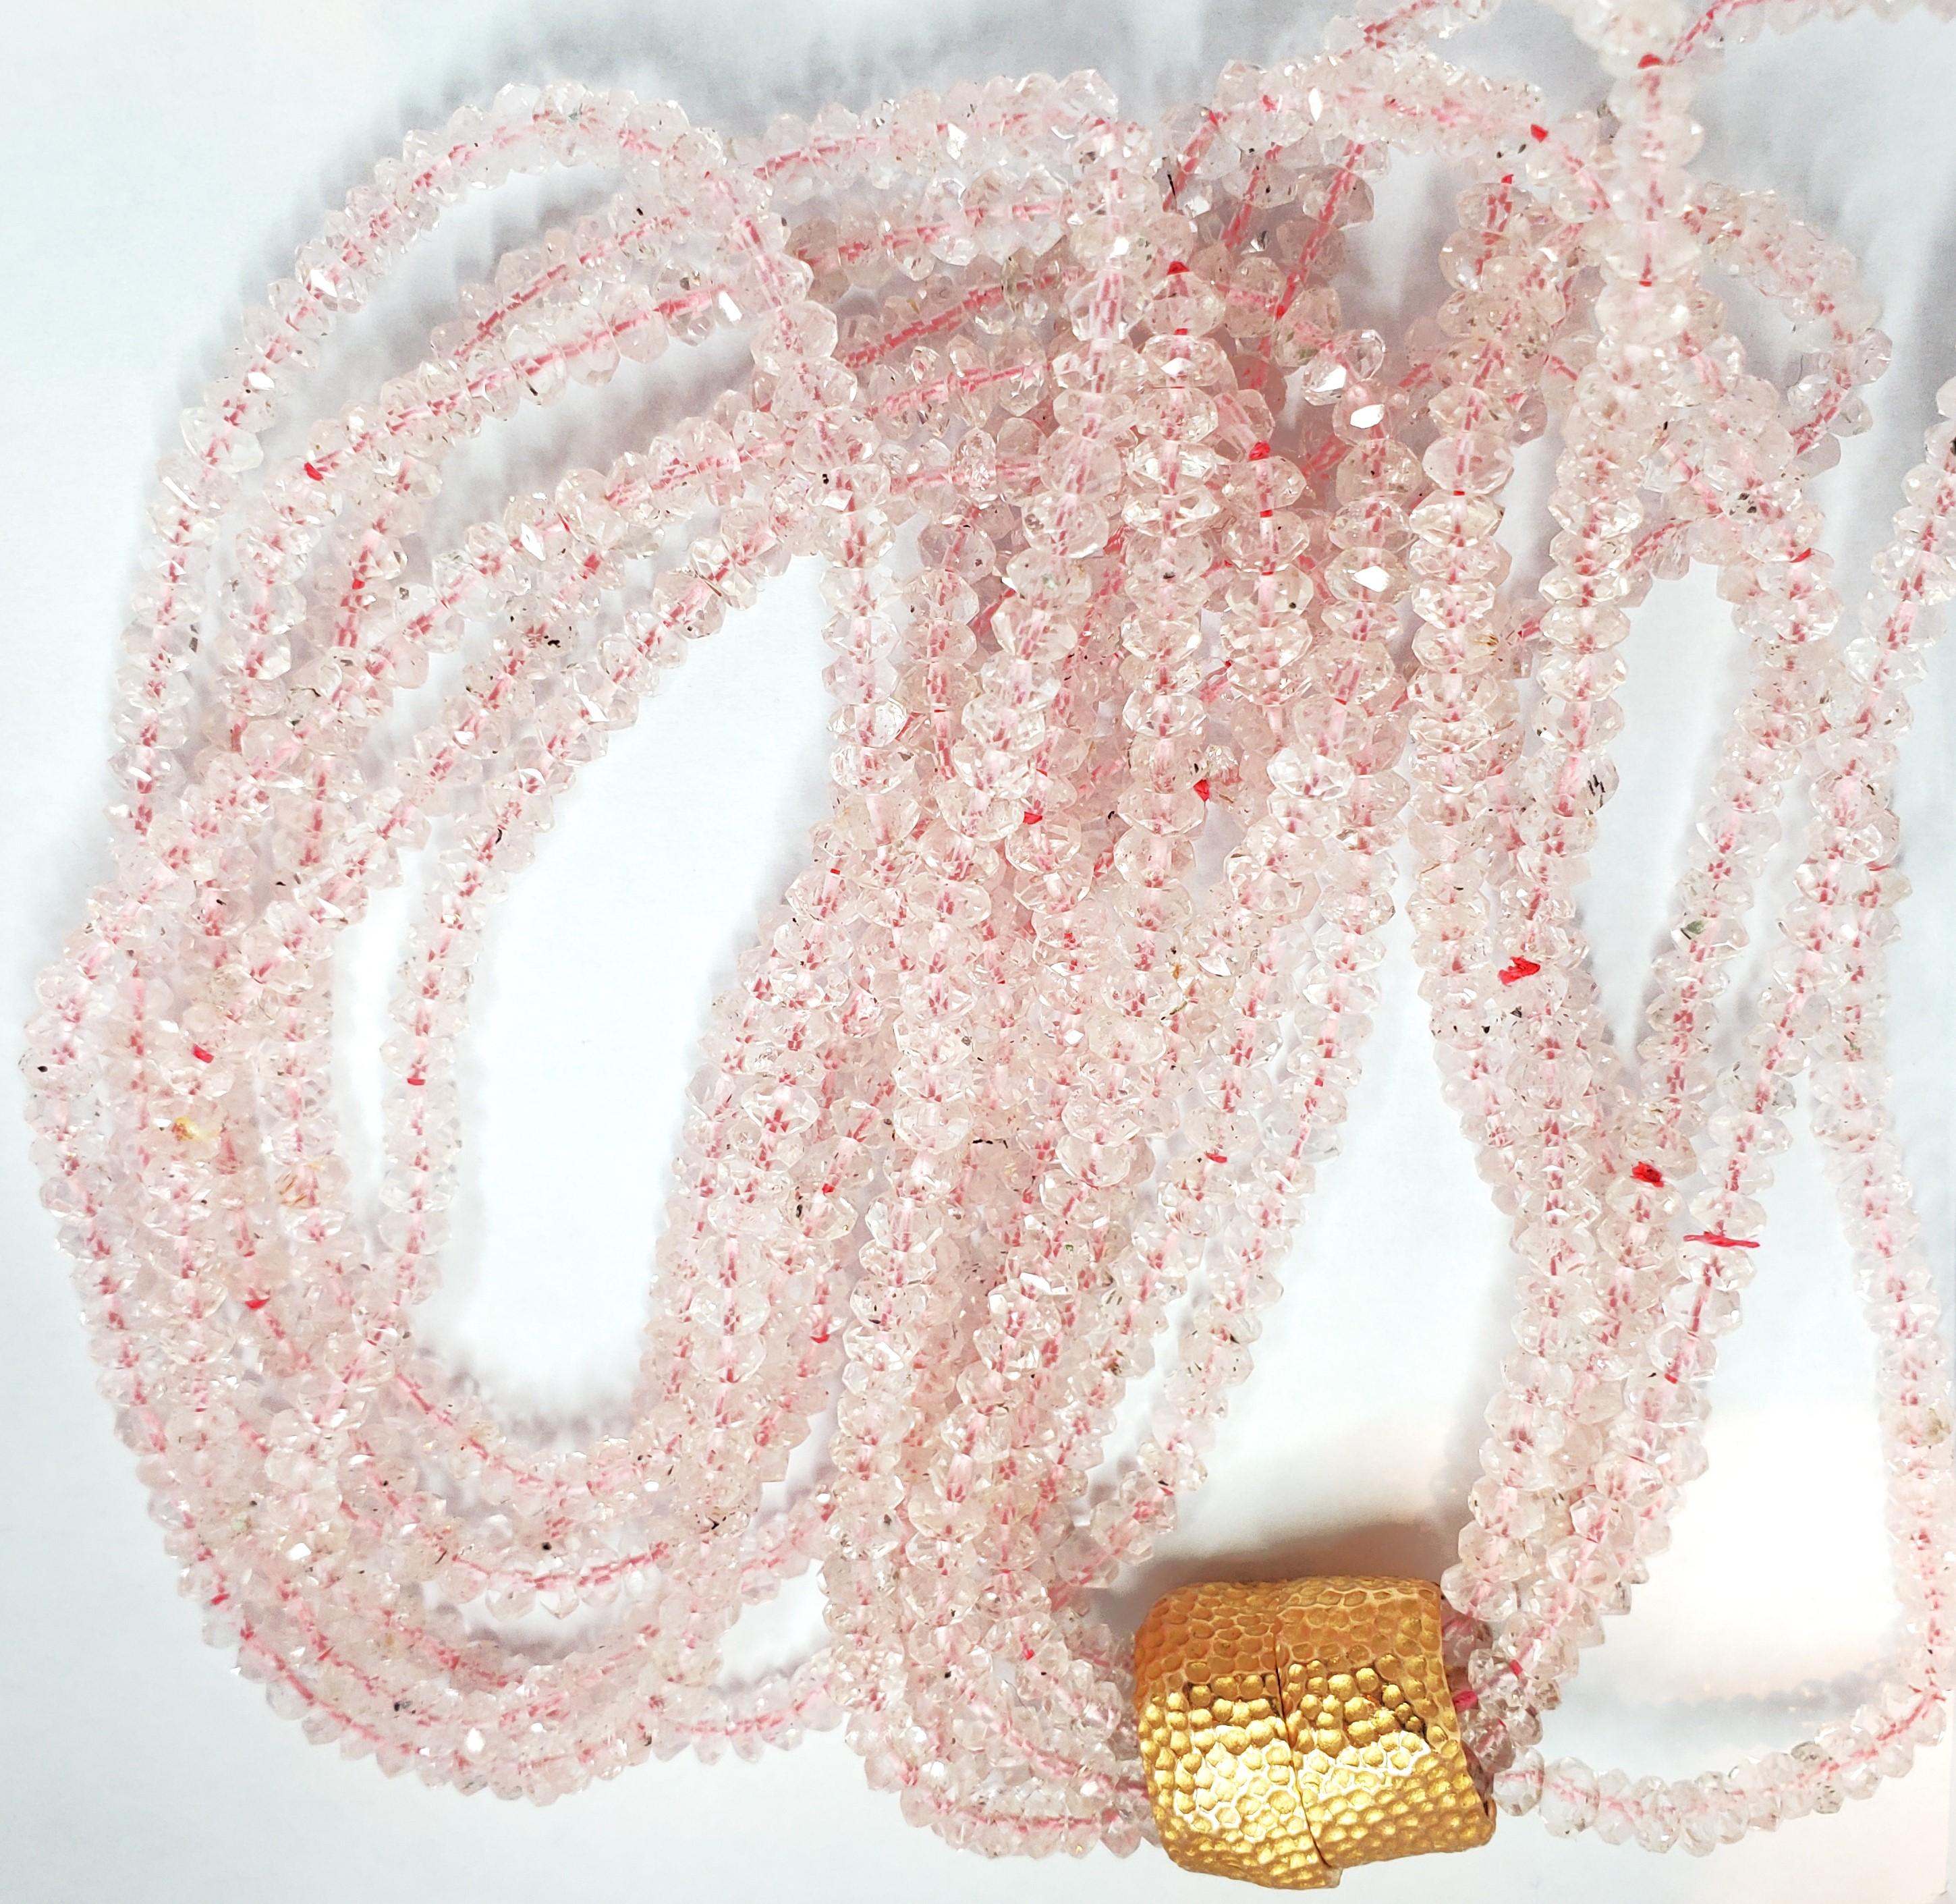 The soft and inviting strands of morganite beads that comprise this necklace invoke memories of wispy cotton candy and summer days. The delicate pink beads lead into an 18k rose gold hammered twist clasp for a refined and uniform finish.

Faceted